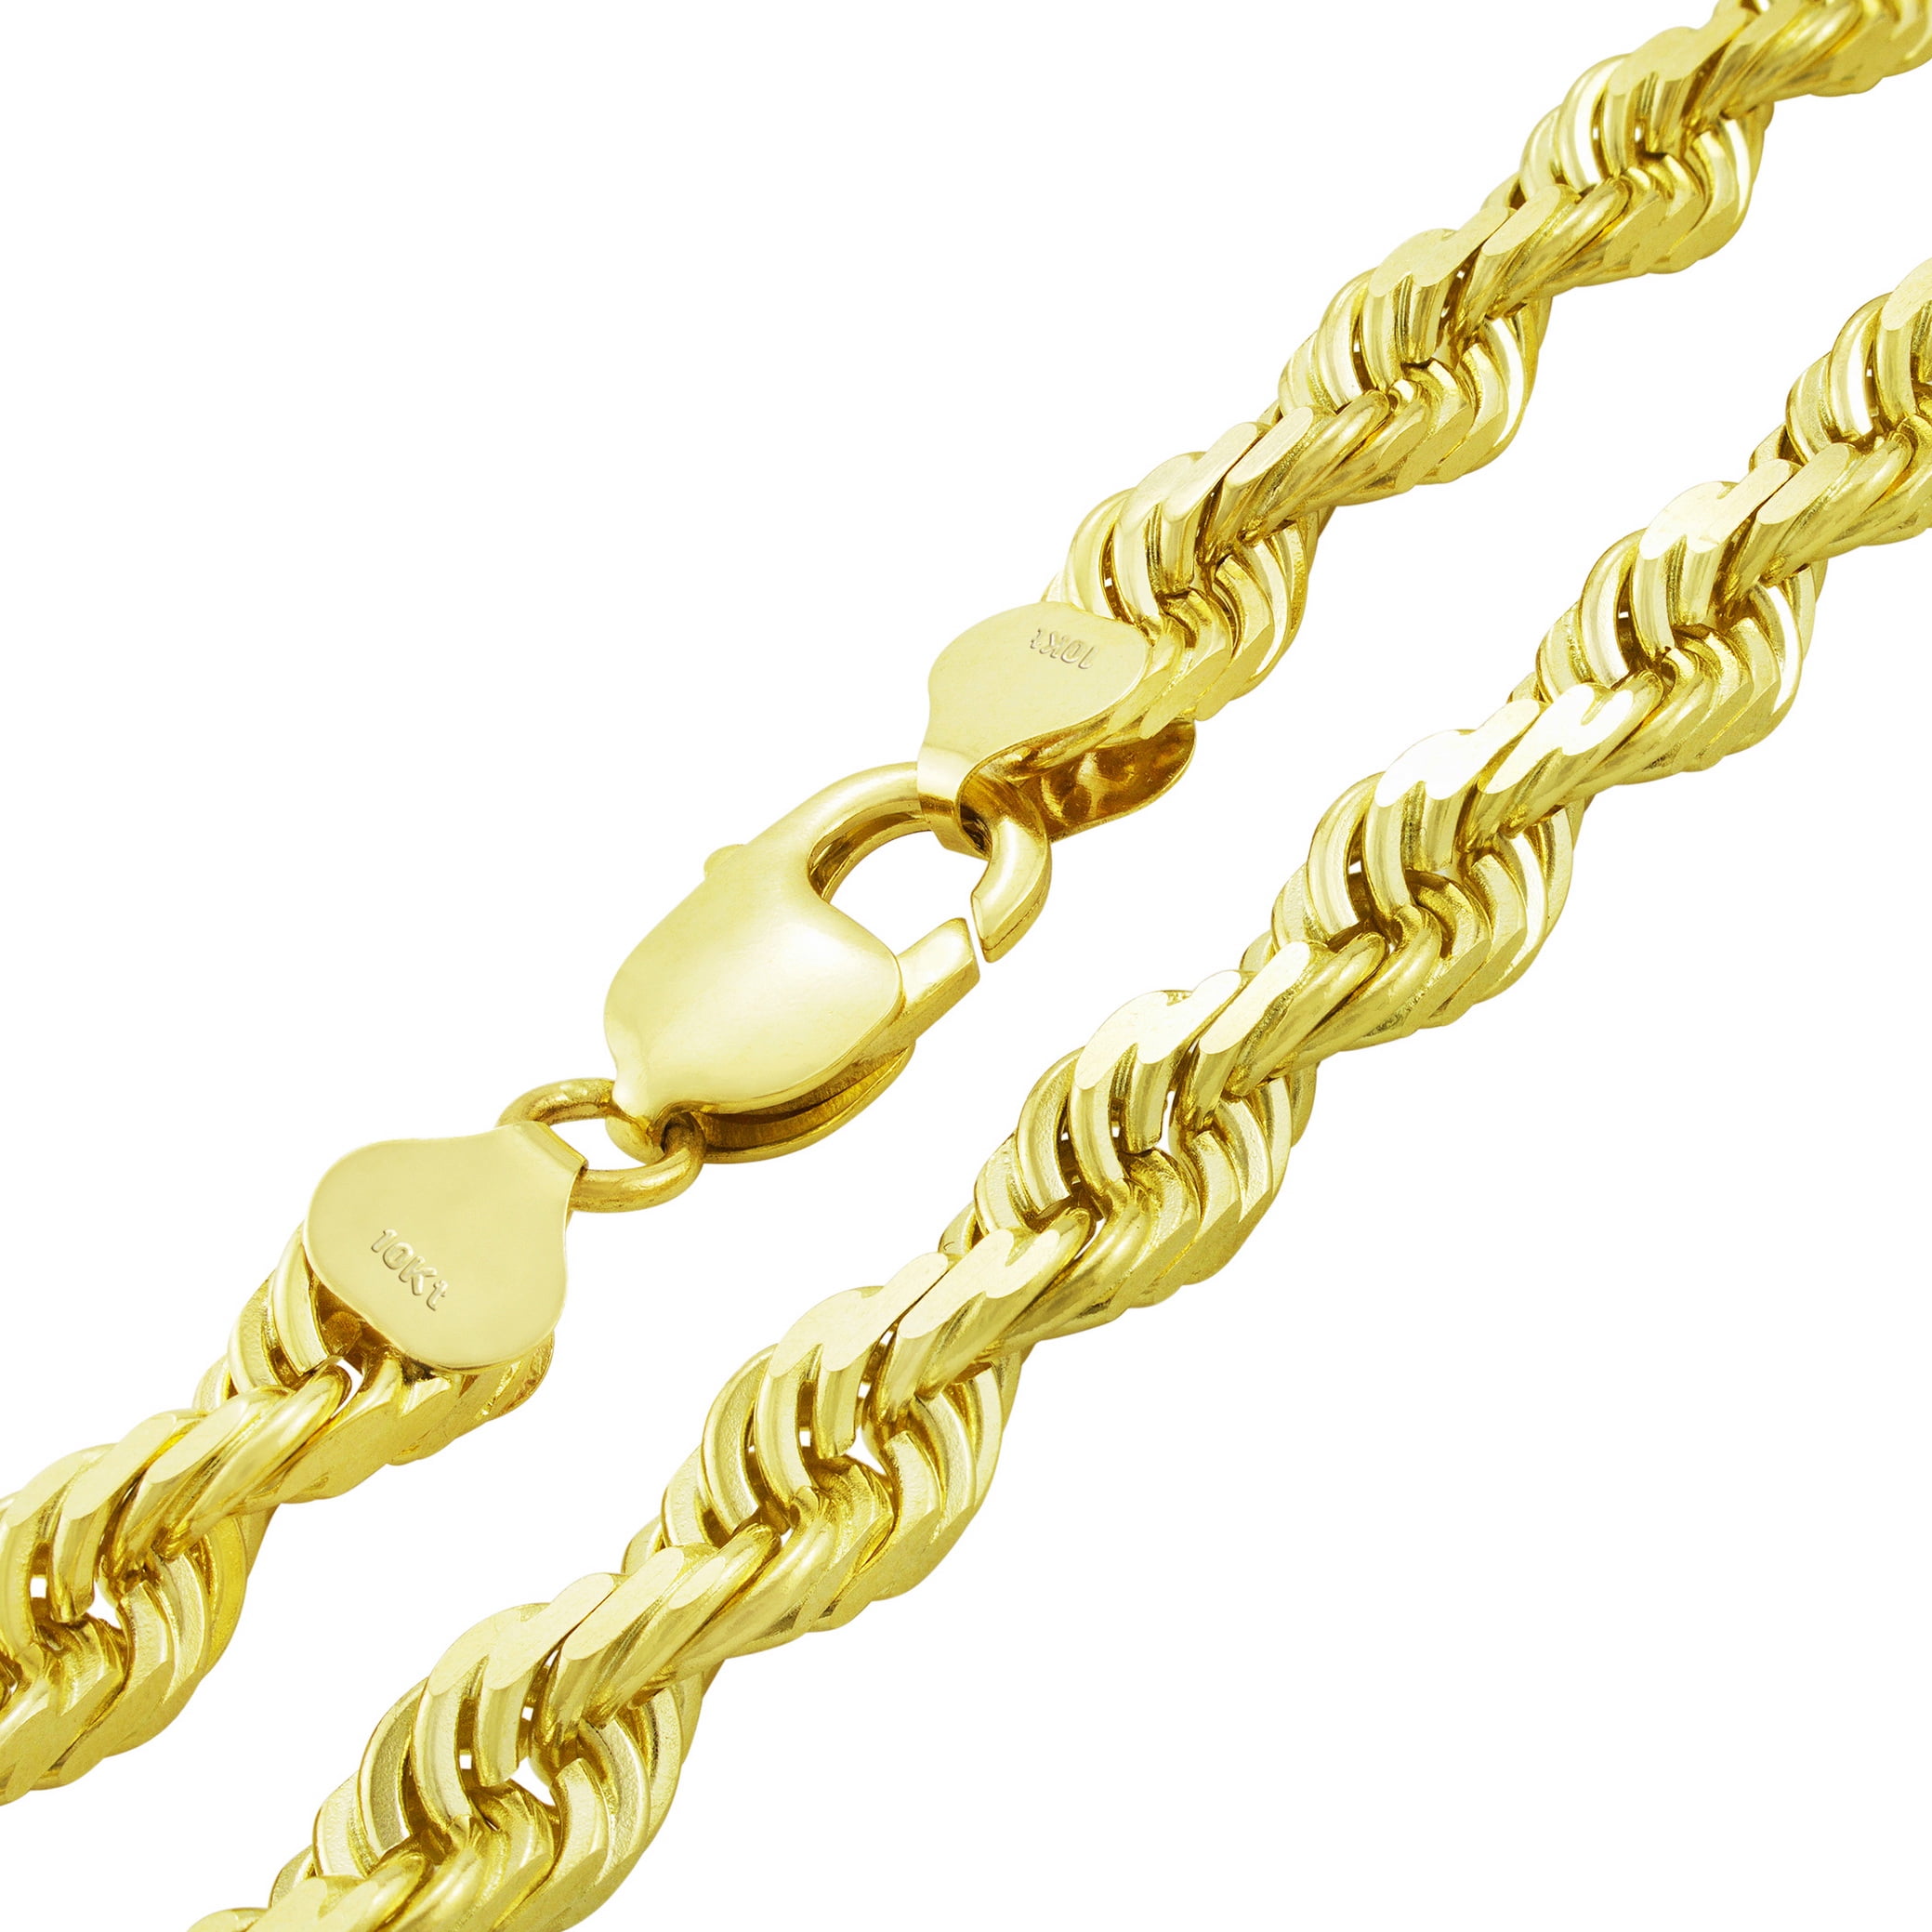 18 INCHES LONG ROPE CHAIN 14KT GOLD ROPE CHAIN WITH LOBSTER LOCK